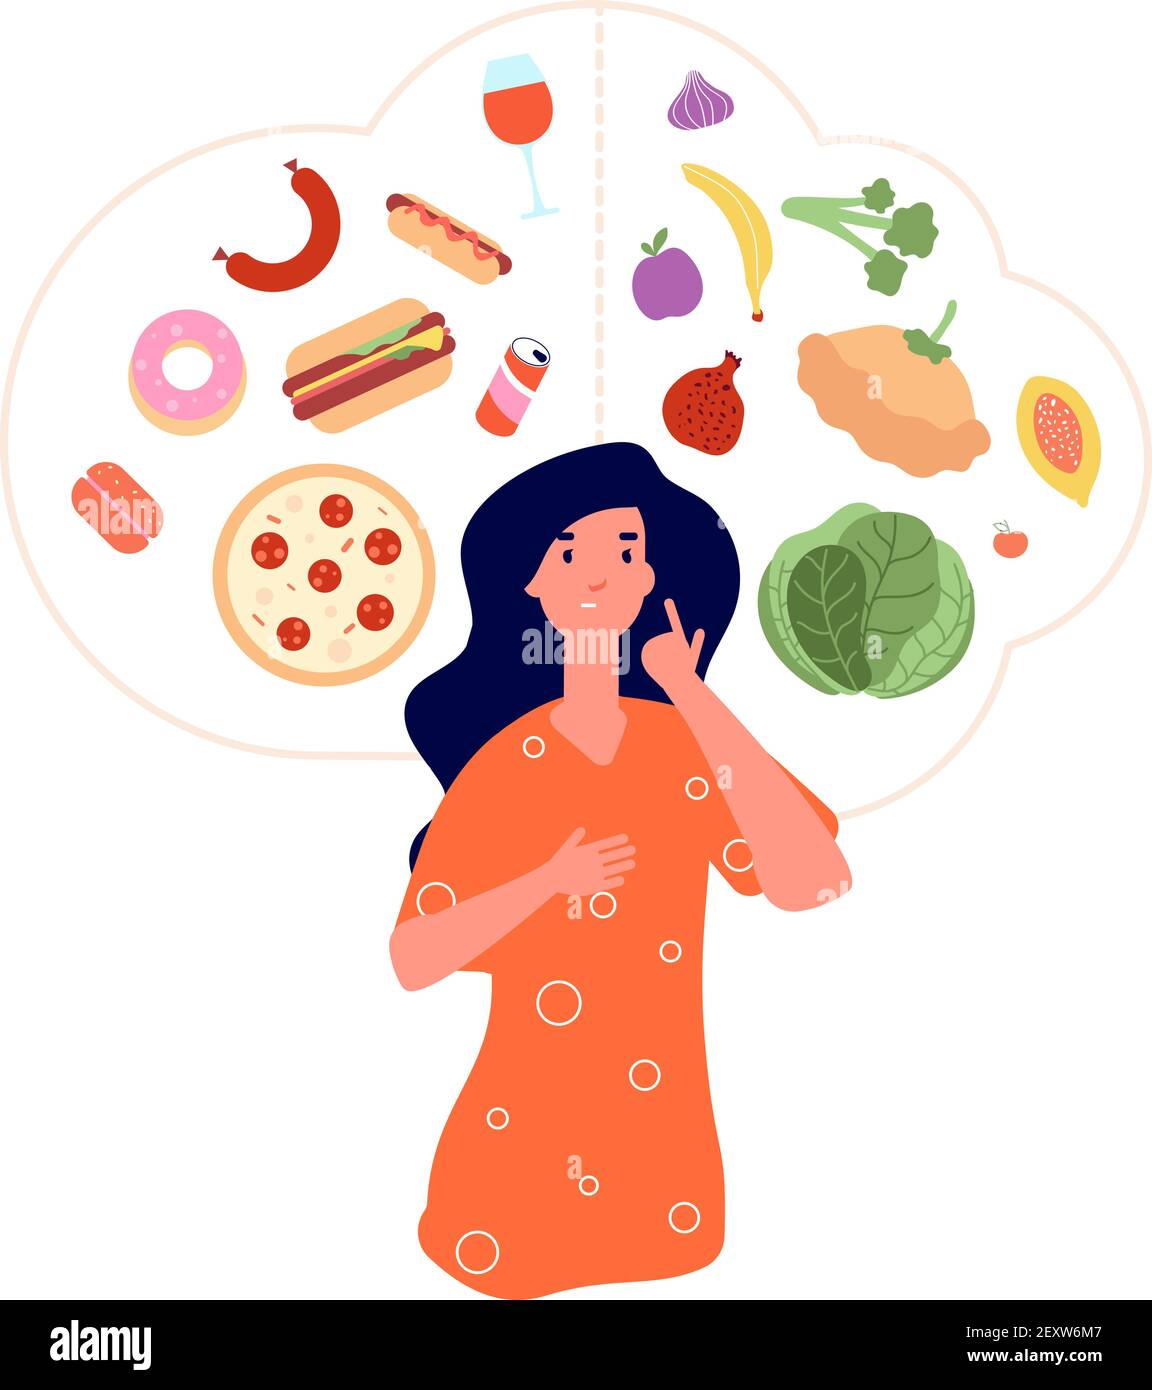 Healthy unhealthy food. Junk vs good foods diet balance. Woman choose between fresh meals and fast food. Lose weight obese vector concept. Woman choice unhealthy nutrition or healthy diet illustration Stock Vector